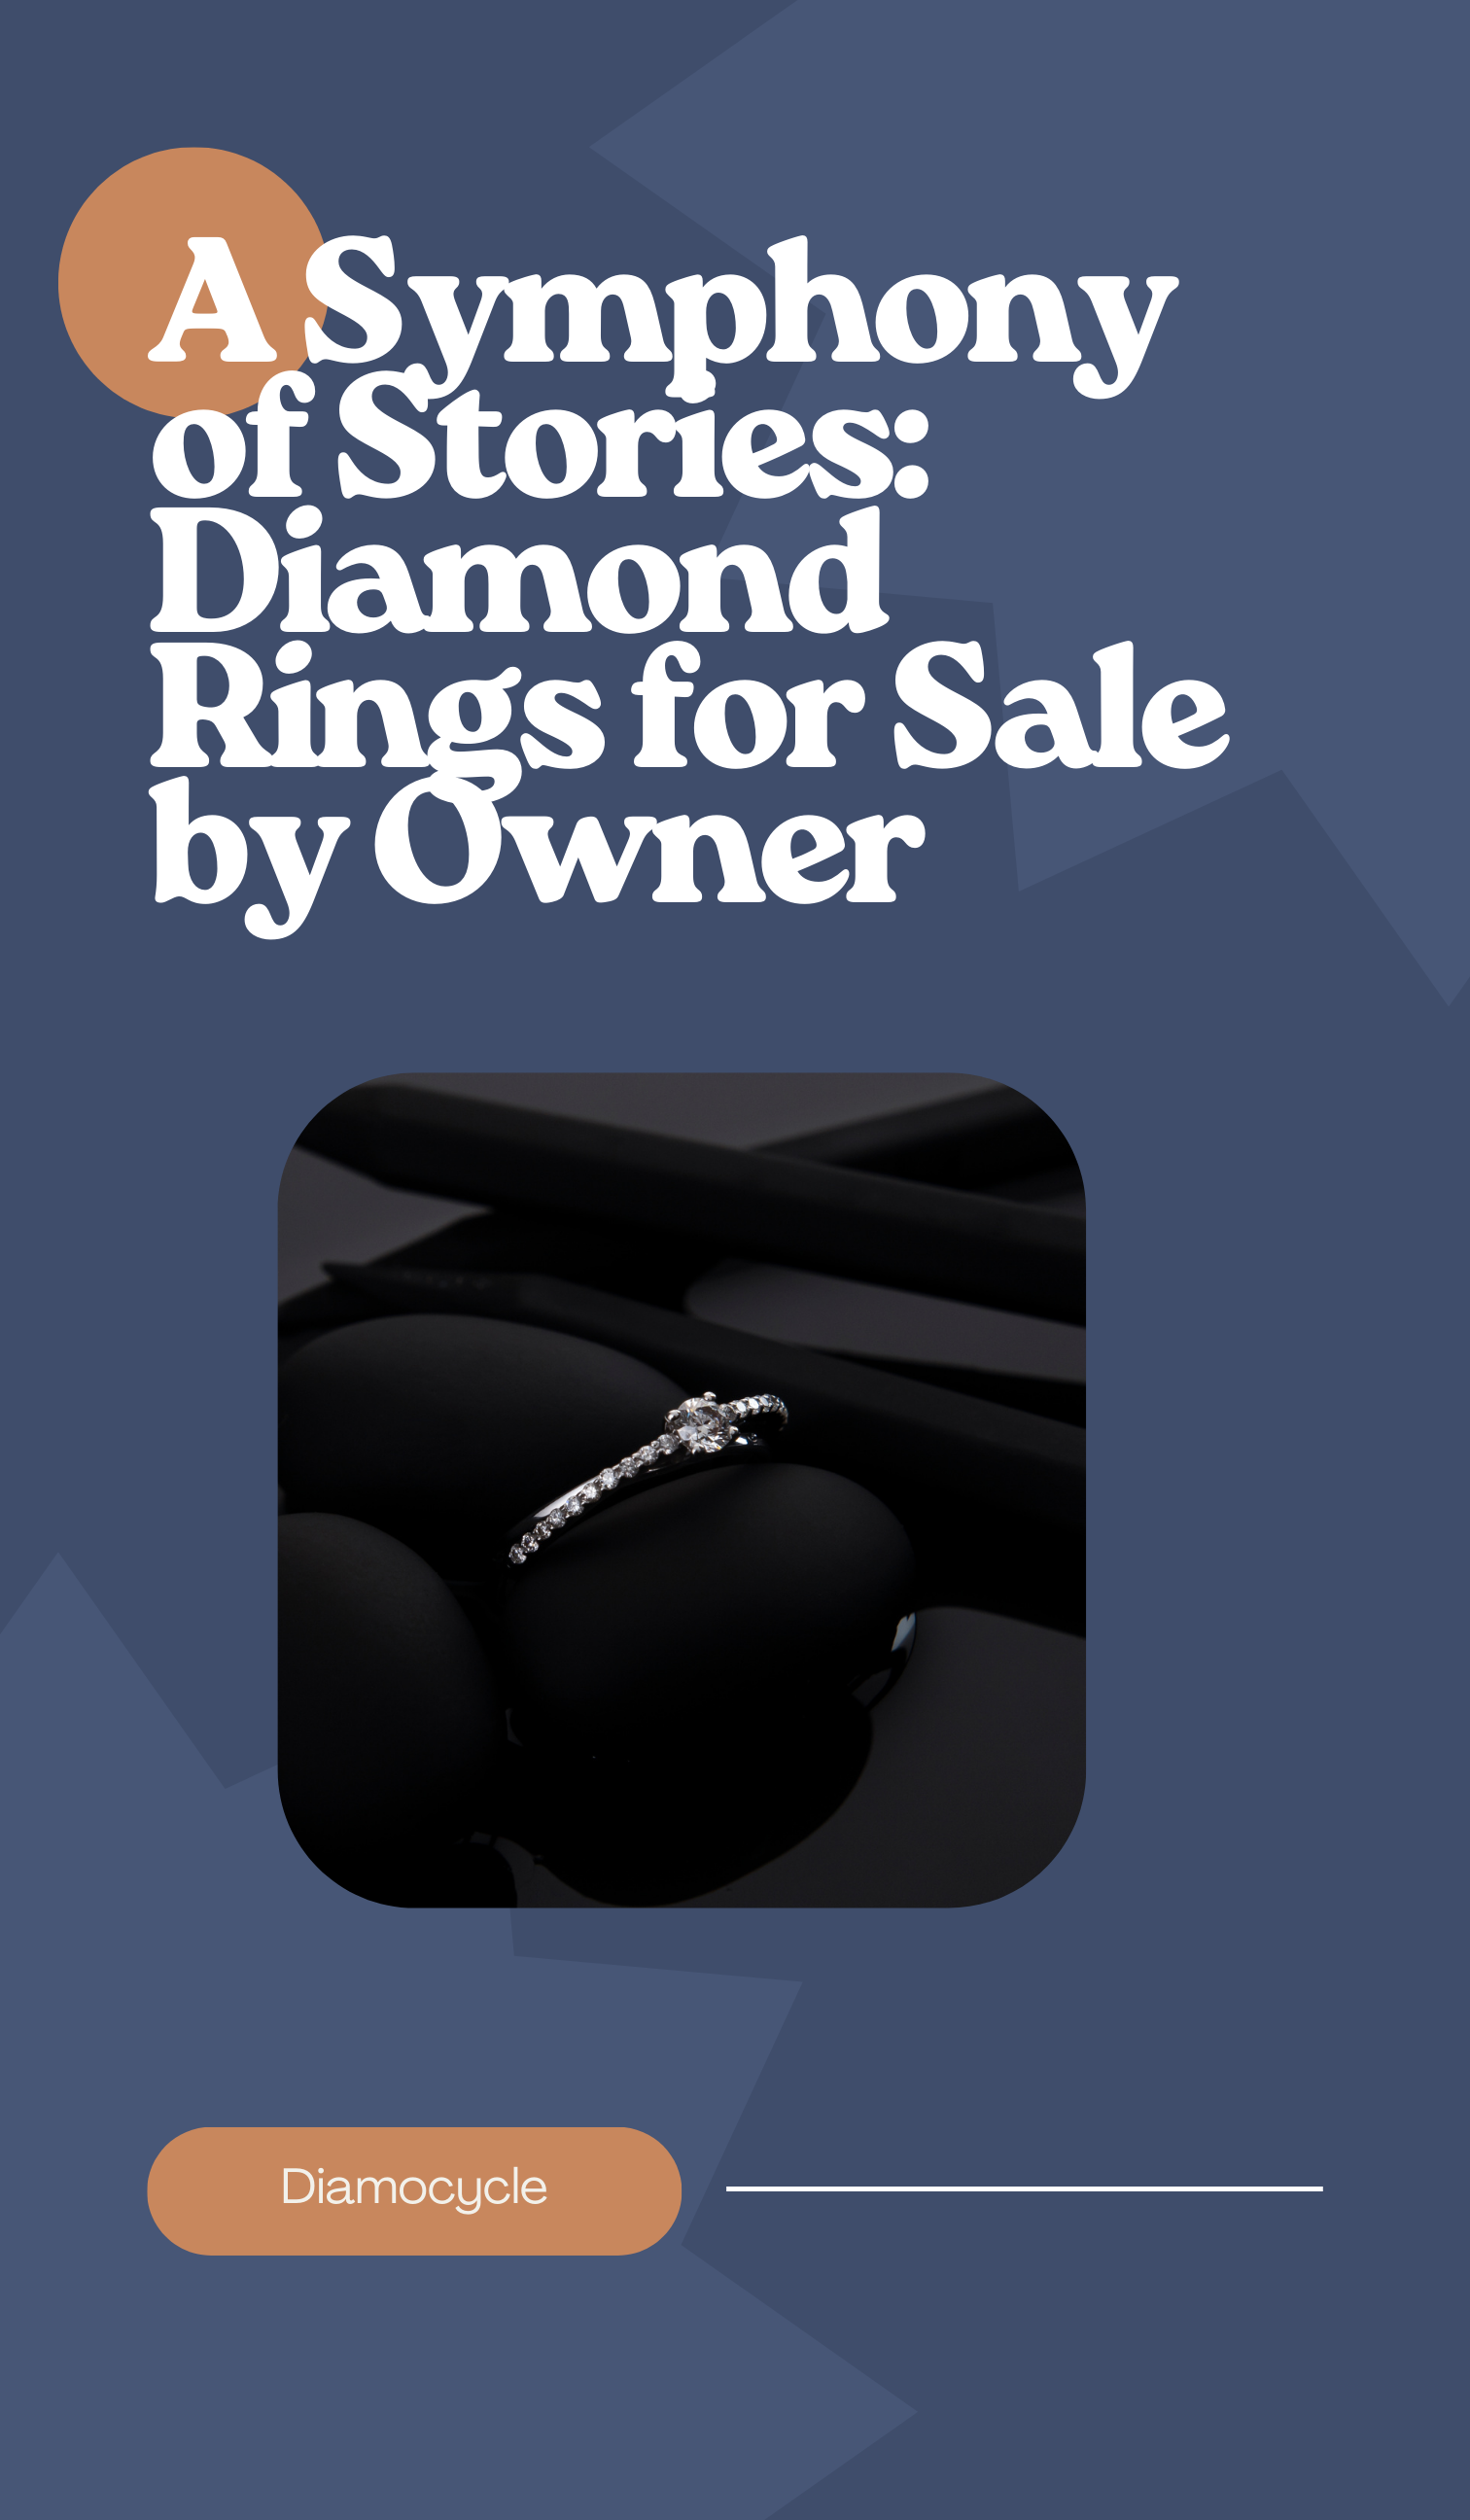 A Symphony of Stories: Diamond Rings for Sale by Owner